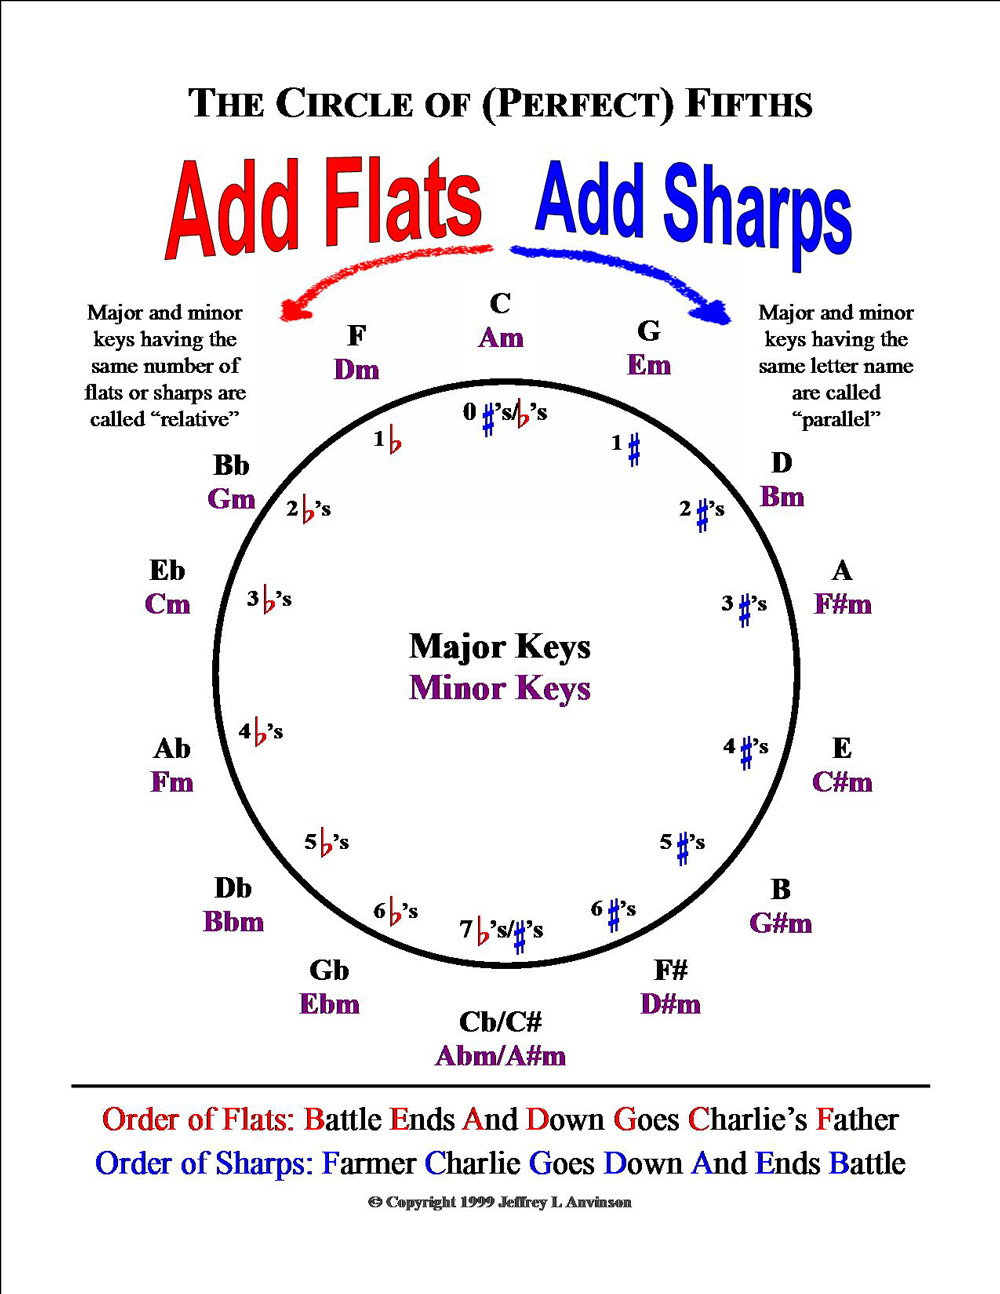 Circle of Fifths created by Jeff Anvinson. Copyright Jeff Anvinson